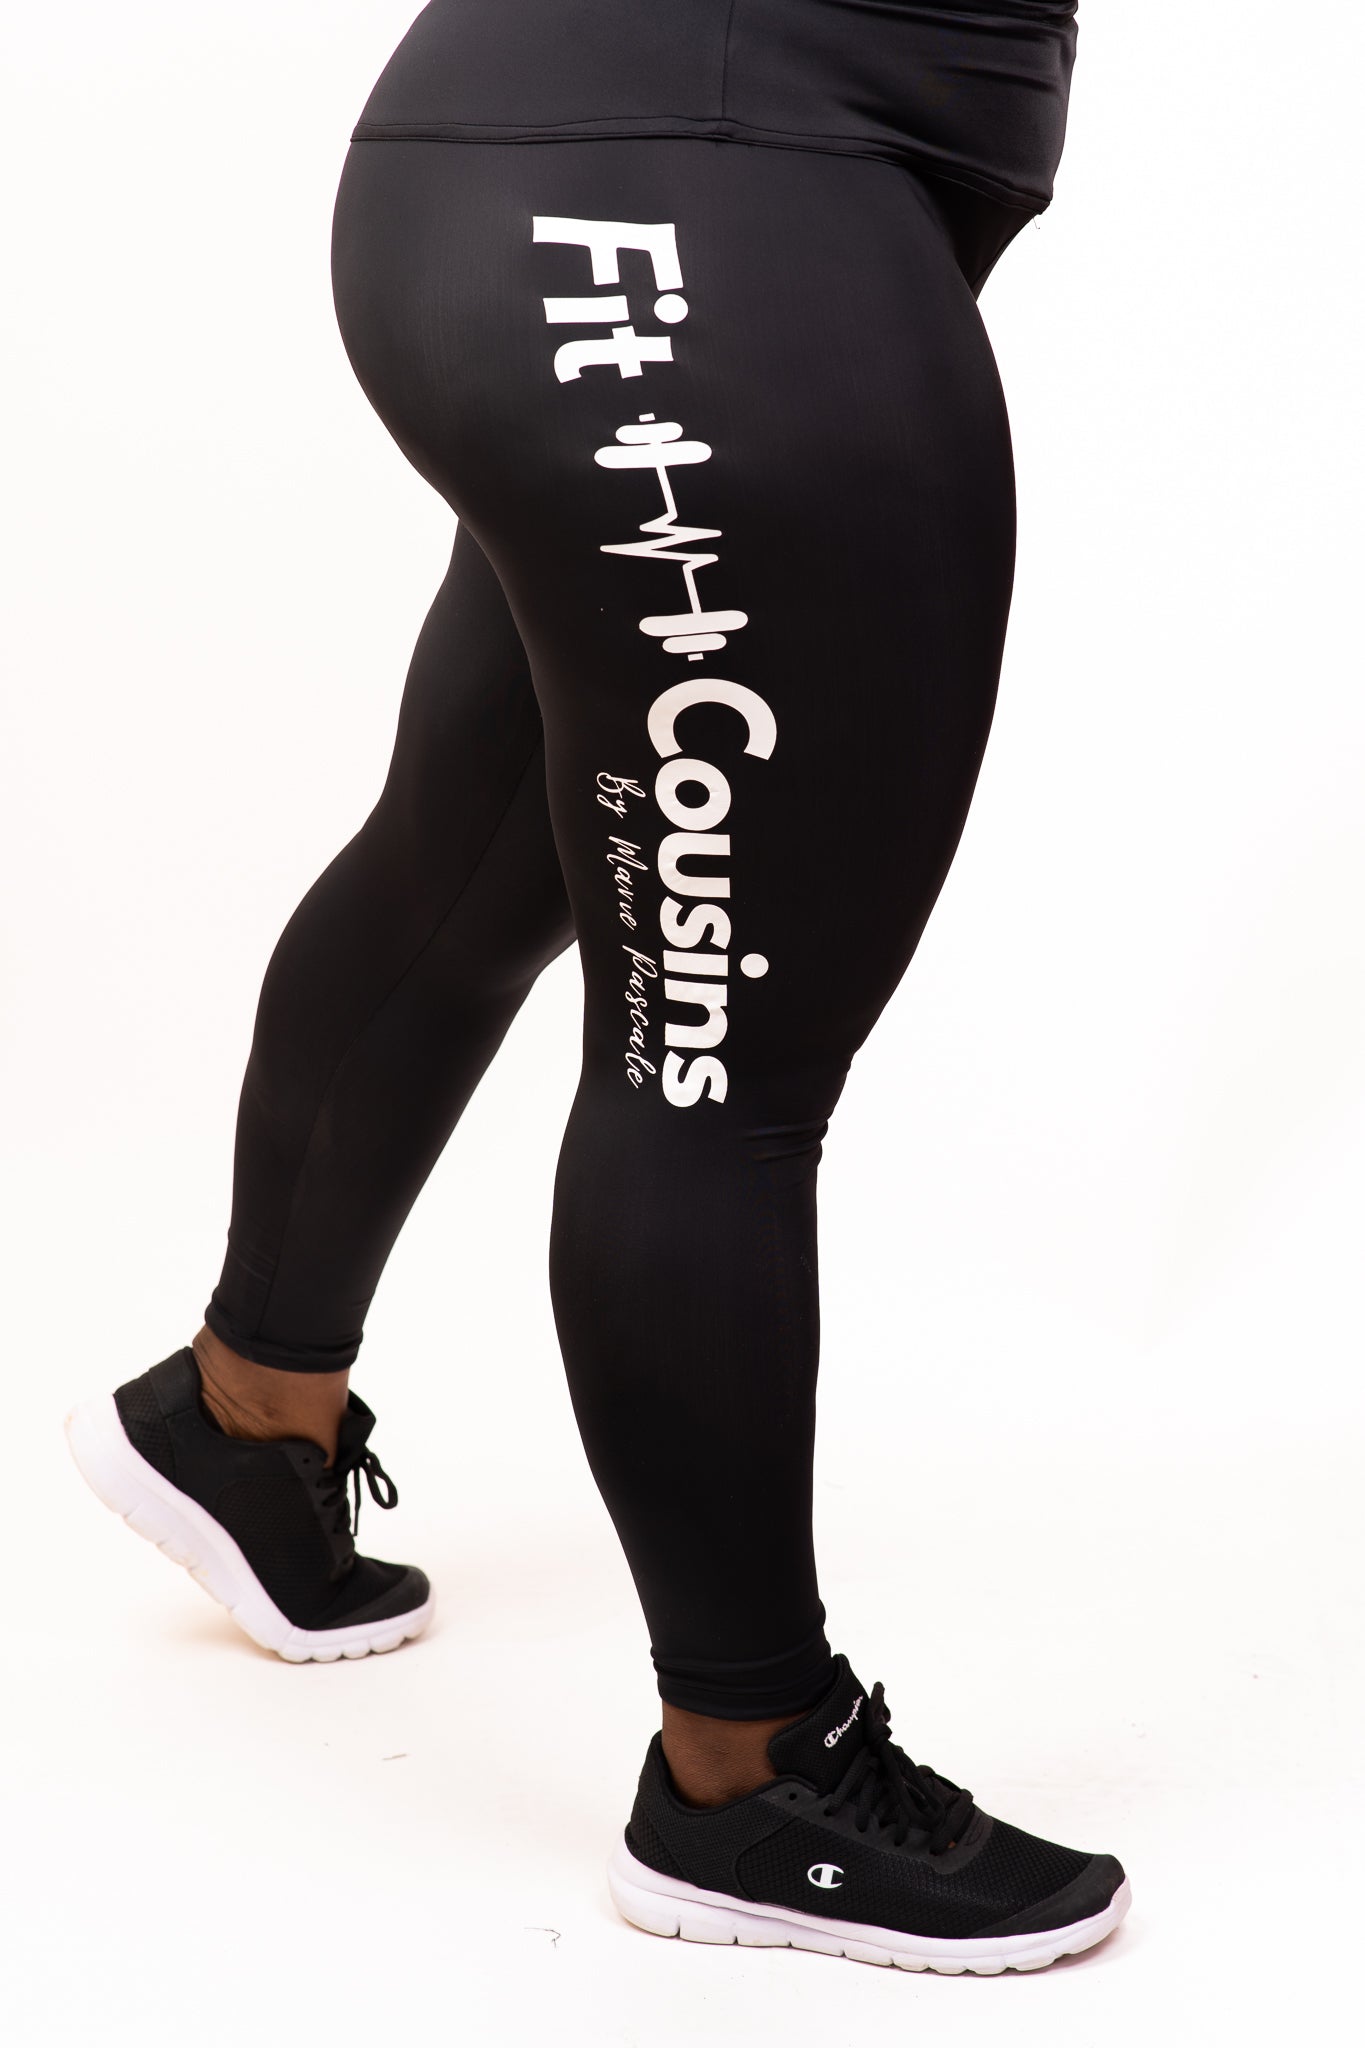 Marie's Power Workout Black Exercise Workout Leggings for Women